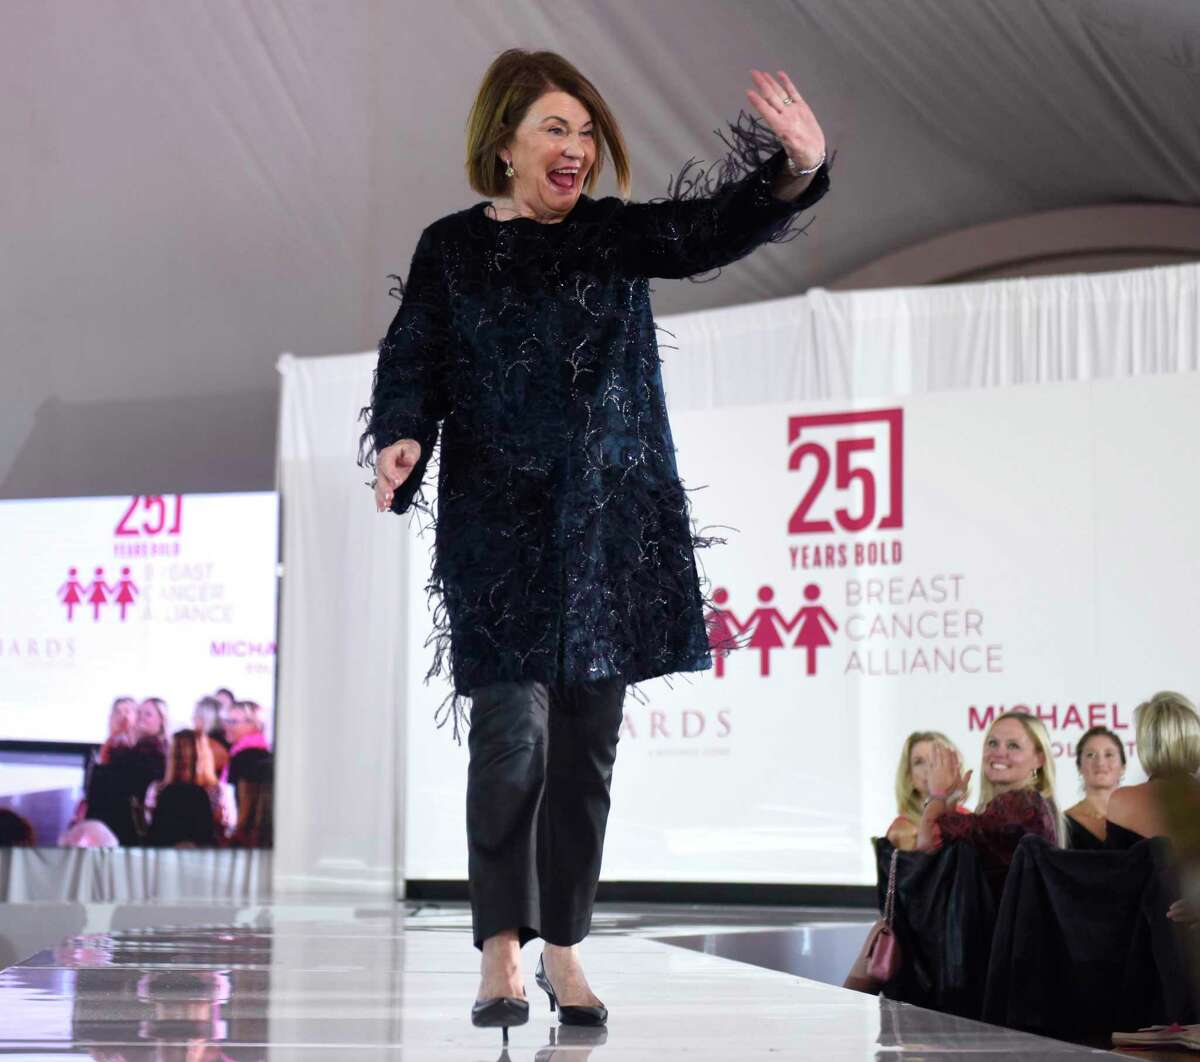 Breast cancer survivor Barbara Ripp, of Greenwich, walks the runway at the Breast Cancer Alliance 25th Anniversary Luncheon & Fashion Show at the Westchester Country Club in Rye, N.Y. Wednesday, Oct. 20, 2021. The breast cancer fundraising event featured a fashion show presented by Richards with looks from Michael Kors 40th anniversary collection, as well as a fashion show from breast cancer survivors.